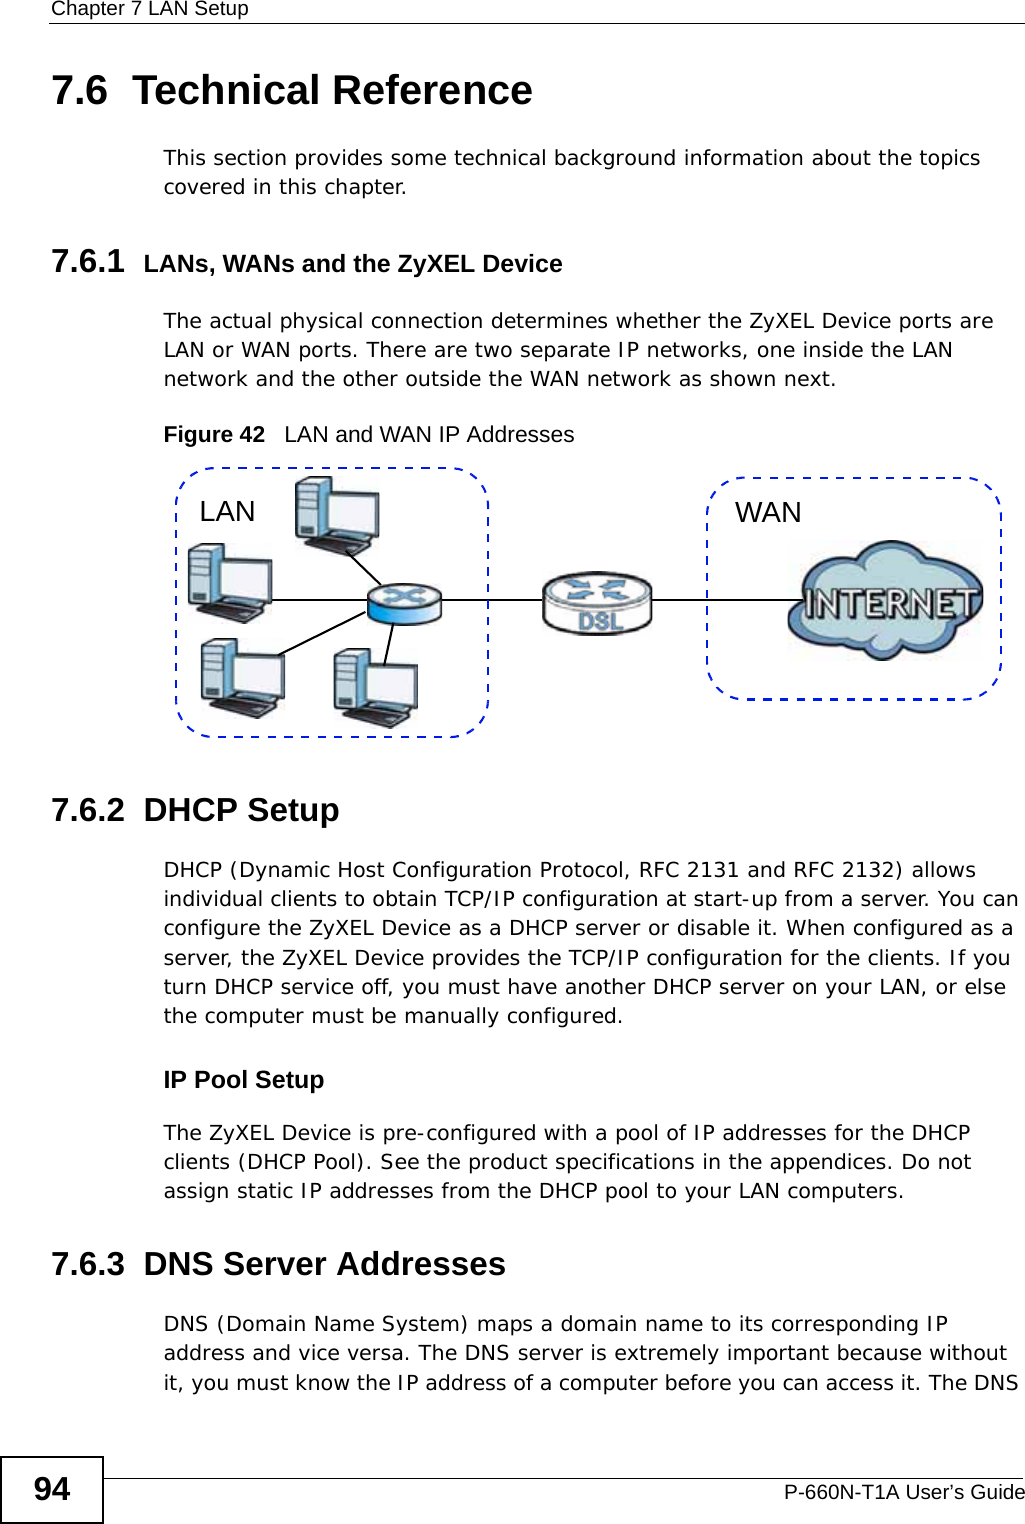 Chapter 7 LAN SetupP-660N-T1A User’s Guide947.6  Technical ReferenceThis section provides some technical background information about the topics covered in this chapter.7.6.1  LANs, WANs and the ZyXEL DeviceThe actual physical connection determines whether the ZyXEL Device ports are LAN or WAN ports. There are two separate IP networks, one inside the LAN network and the other outside the WAN network as shown next.Figure 42   LAN and WAN IP Addresses7.6.2  DHCP SetupDHCP (Dynamic Host Configuration Protocol, RFC 2131 and RFC 2132) allows individual clients to obtain TCP/IP configuration at start-up from a server. You can configure the ZyXEL Device as a DHCP server or disable it. When configured as a server, the ZyXEL Device provides the TCP/IP configuration for the clients. If you turn DHCP service off, you must have another DHCP server on your LAN, or else the computer must be manually configured. IP Pool SetupThe ZyXEL Device is pre-configured with a pool of IP addresses for the DHCP clients (DHCP Pool). See the product specifications in the appendices. Do not assign static IP addresses from the DHCP pool to your LAN computers.7.6.3  DNS Server Addresses DNS (Domain Name System) maps a domain name to its corresponding IP address and vice versa. The DNS server is extremely important because without it, you must know the IP address of a computer before you can access it. The DNS WANLAN